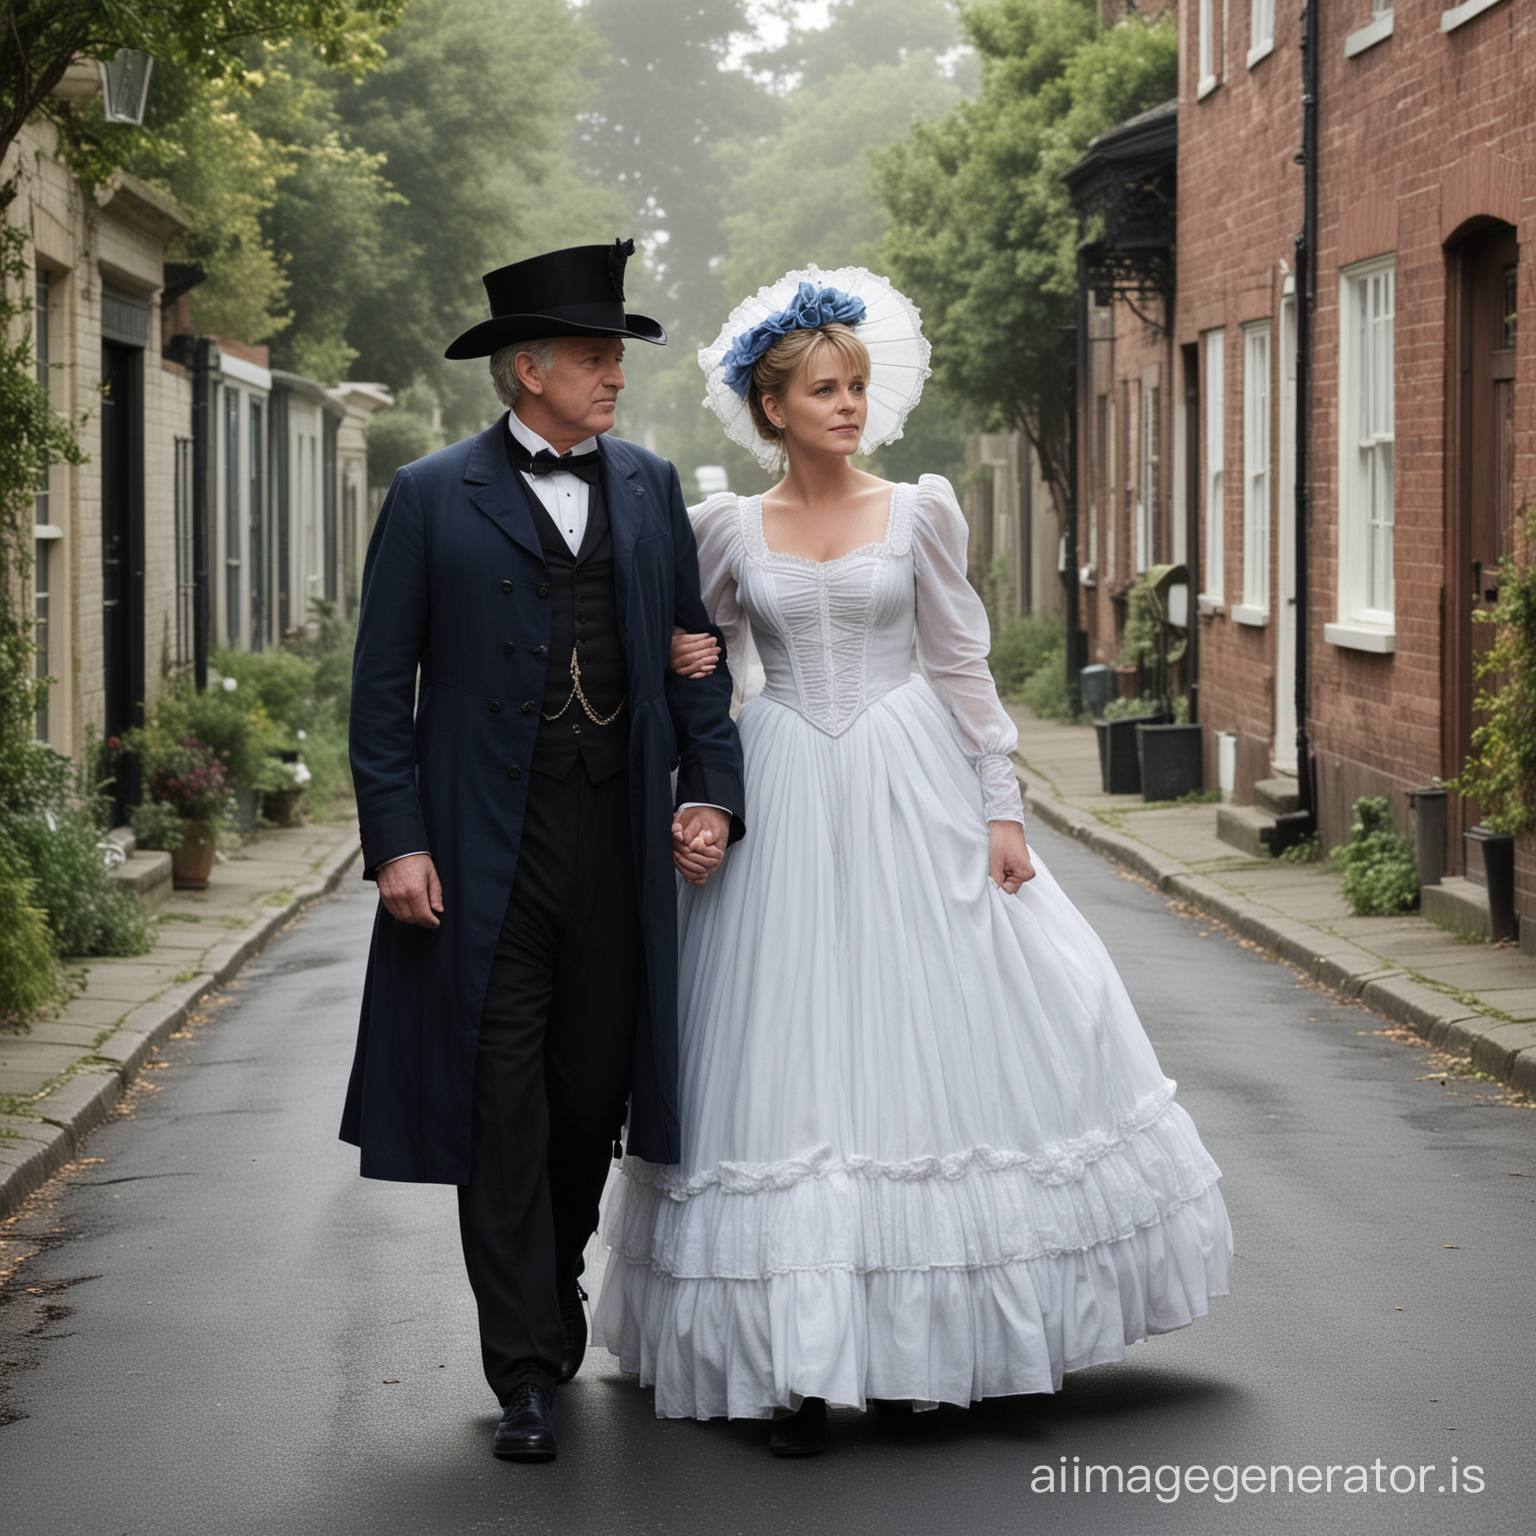 Amanda Tapping as Major Samantha Carter wearing a dark blue floor-length loose billowing 1860 Victorian crinoline poofy dress with a frilly bonnet walking on a Victorian era street with an old man dressed into a black Victorian suit who seems to be her newlywed husband